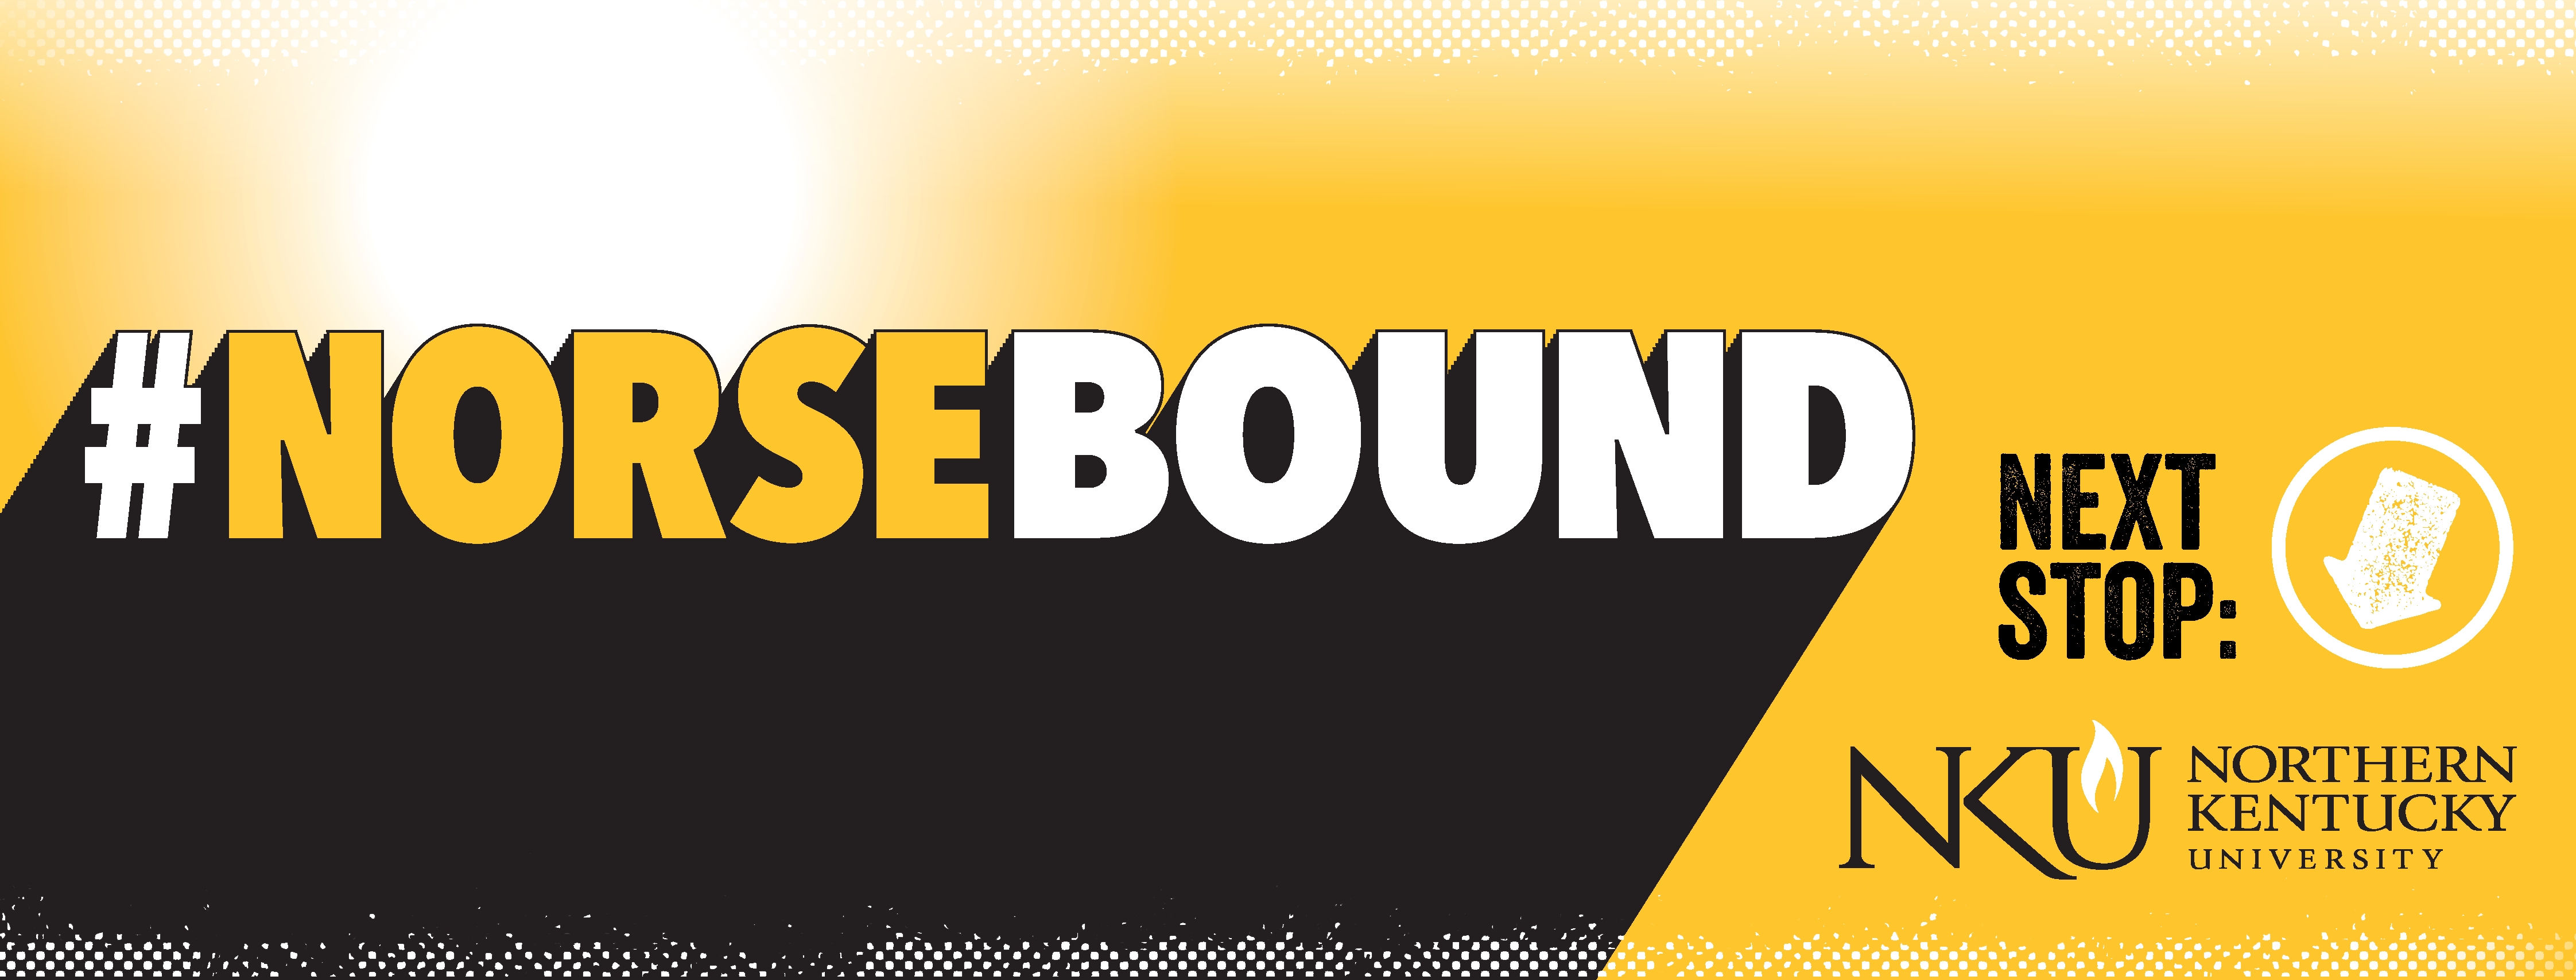 norse bound graphic black and yellow